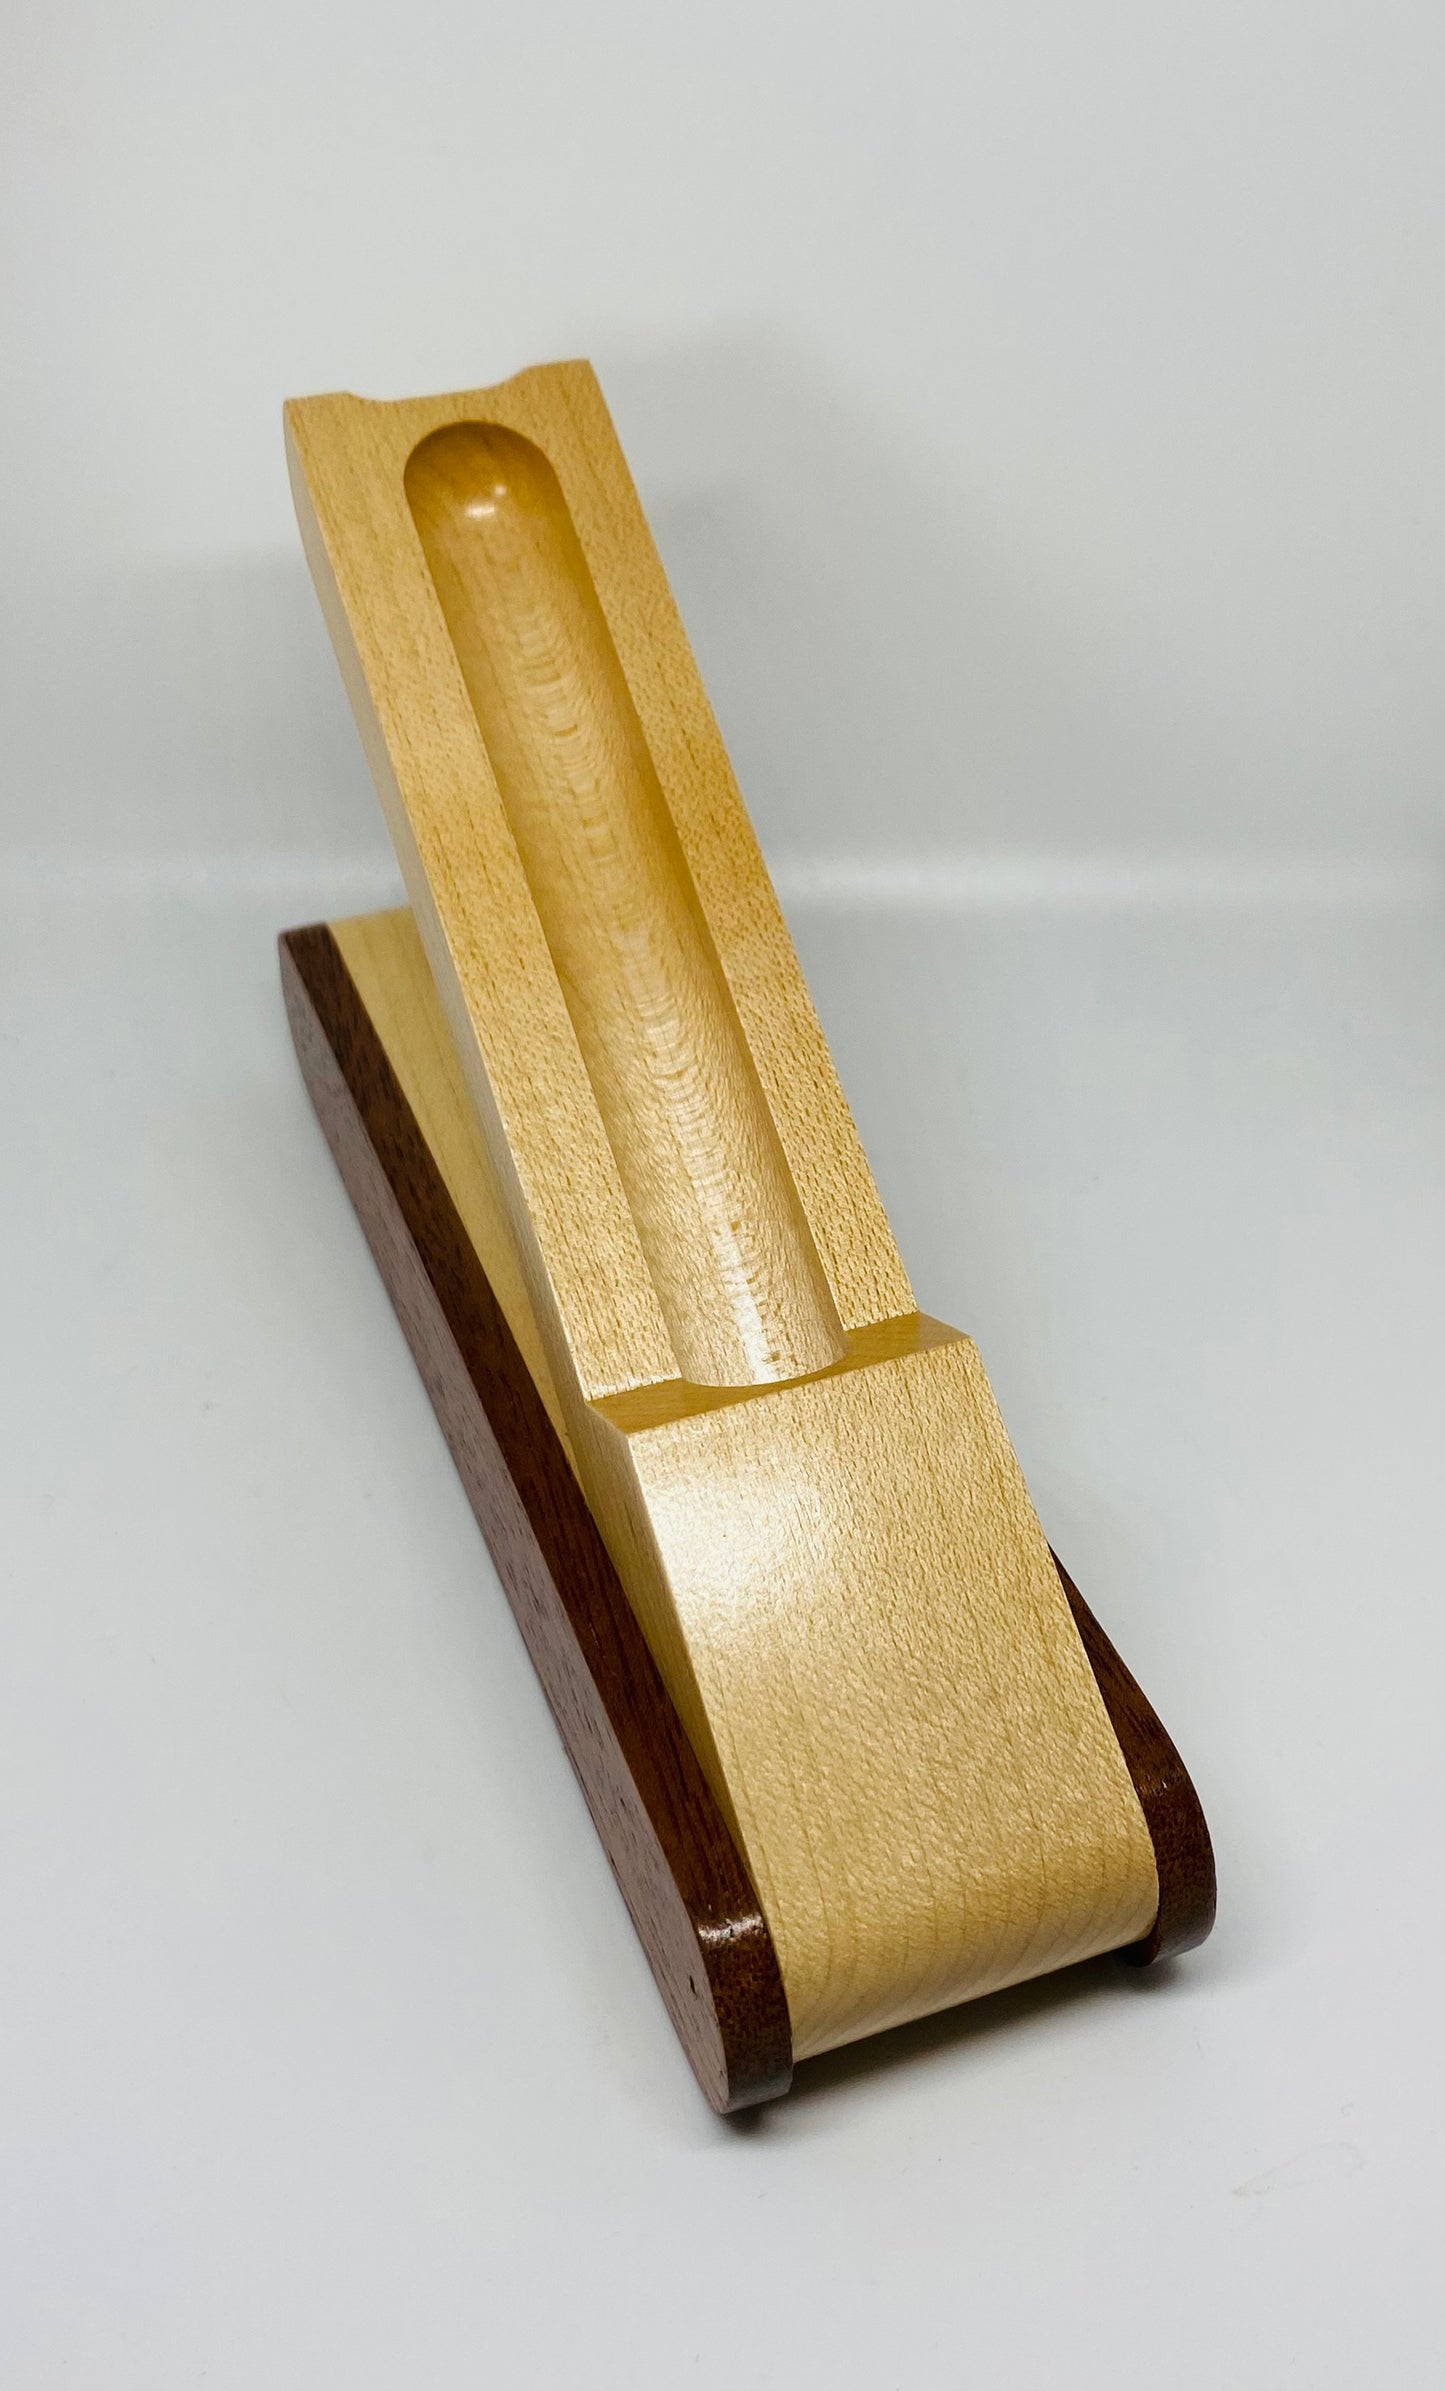 Maple and rosewood single pen box